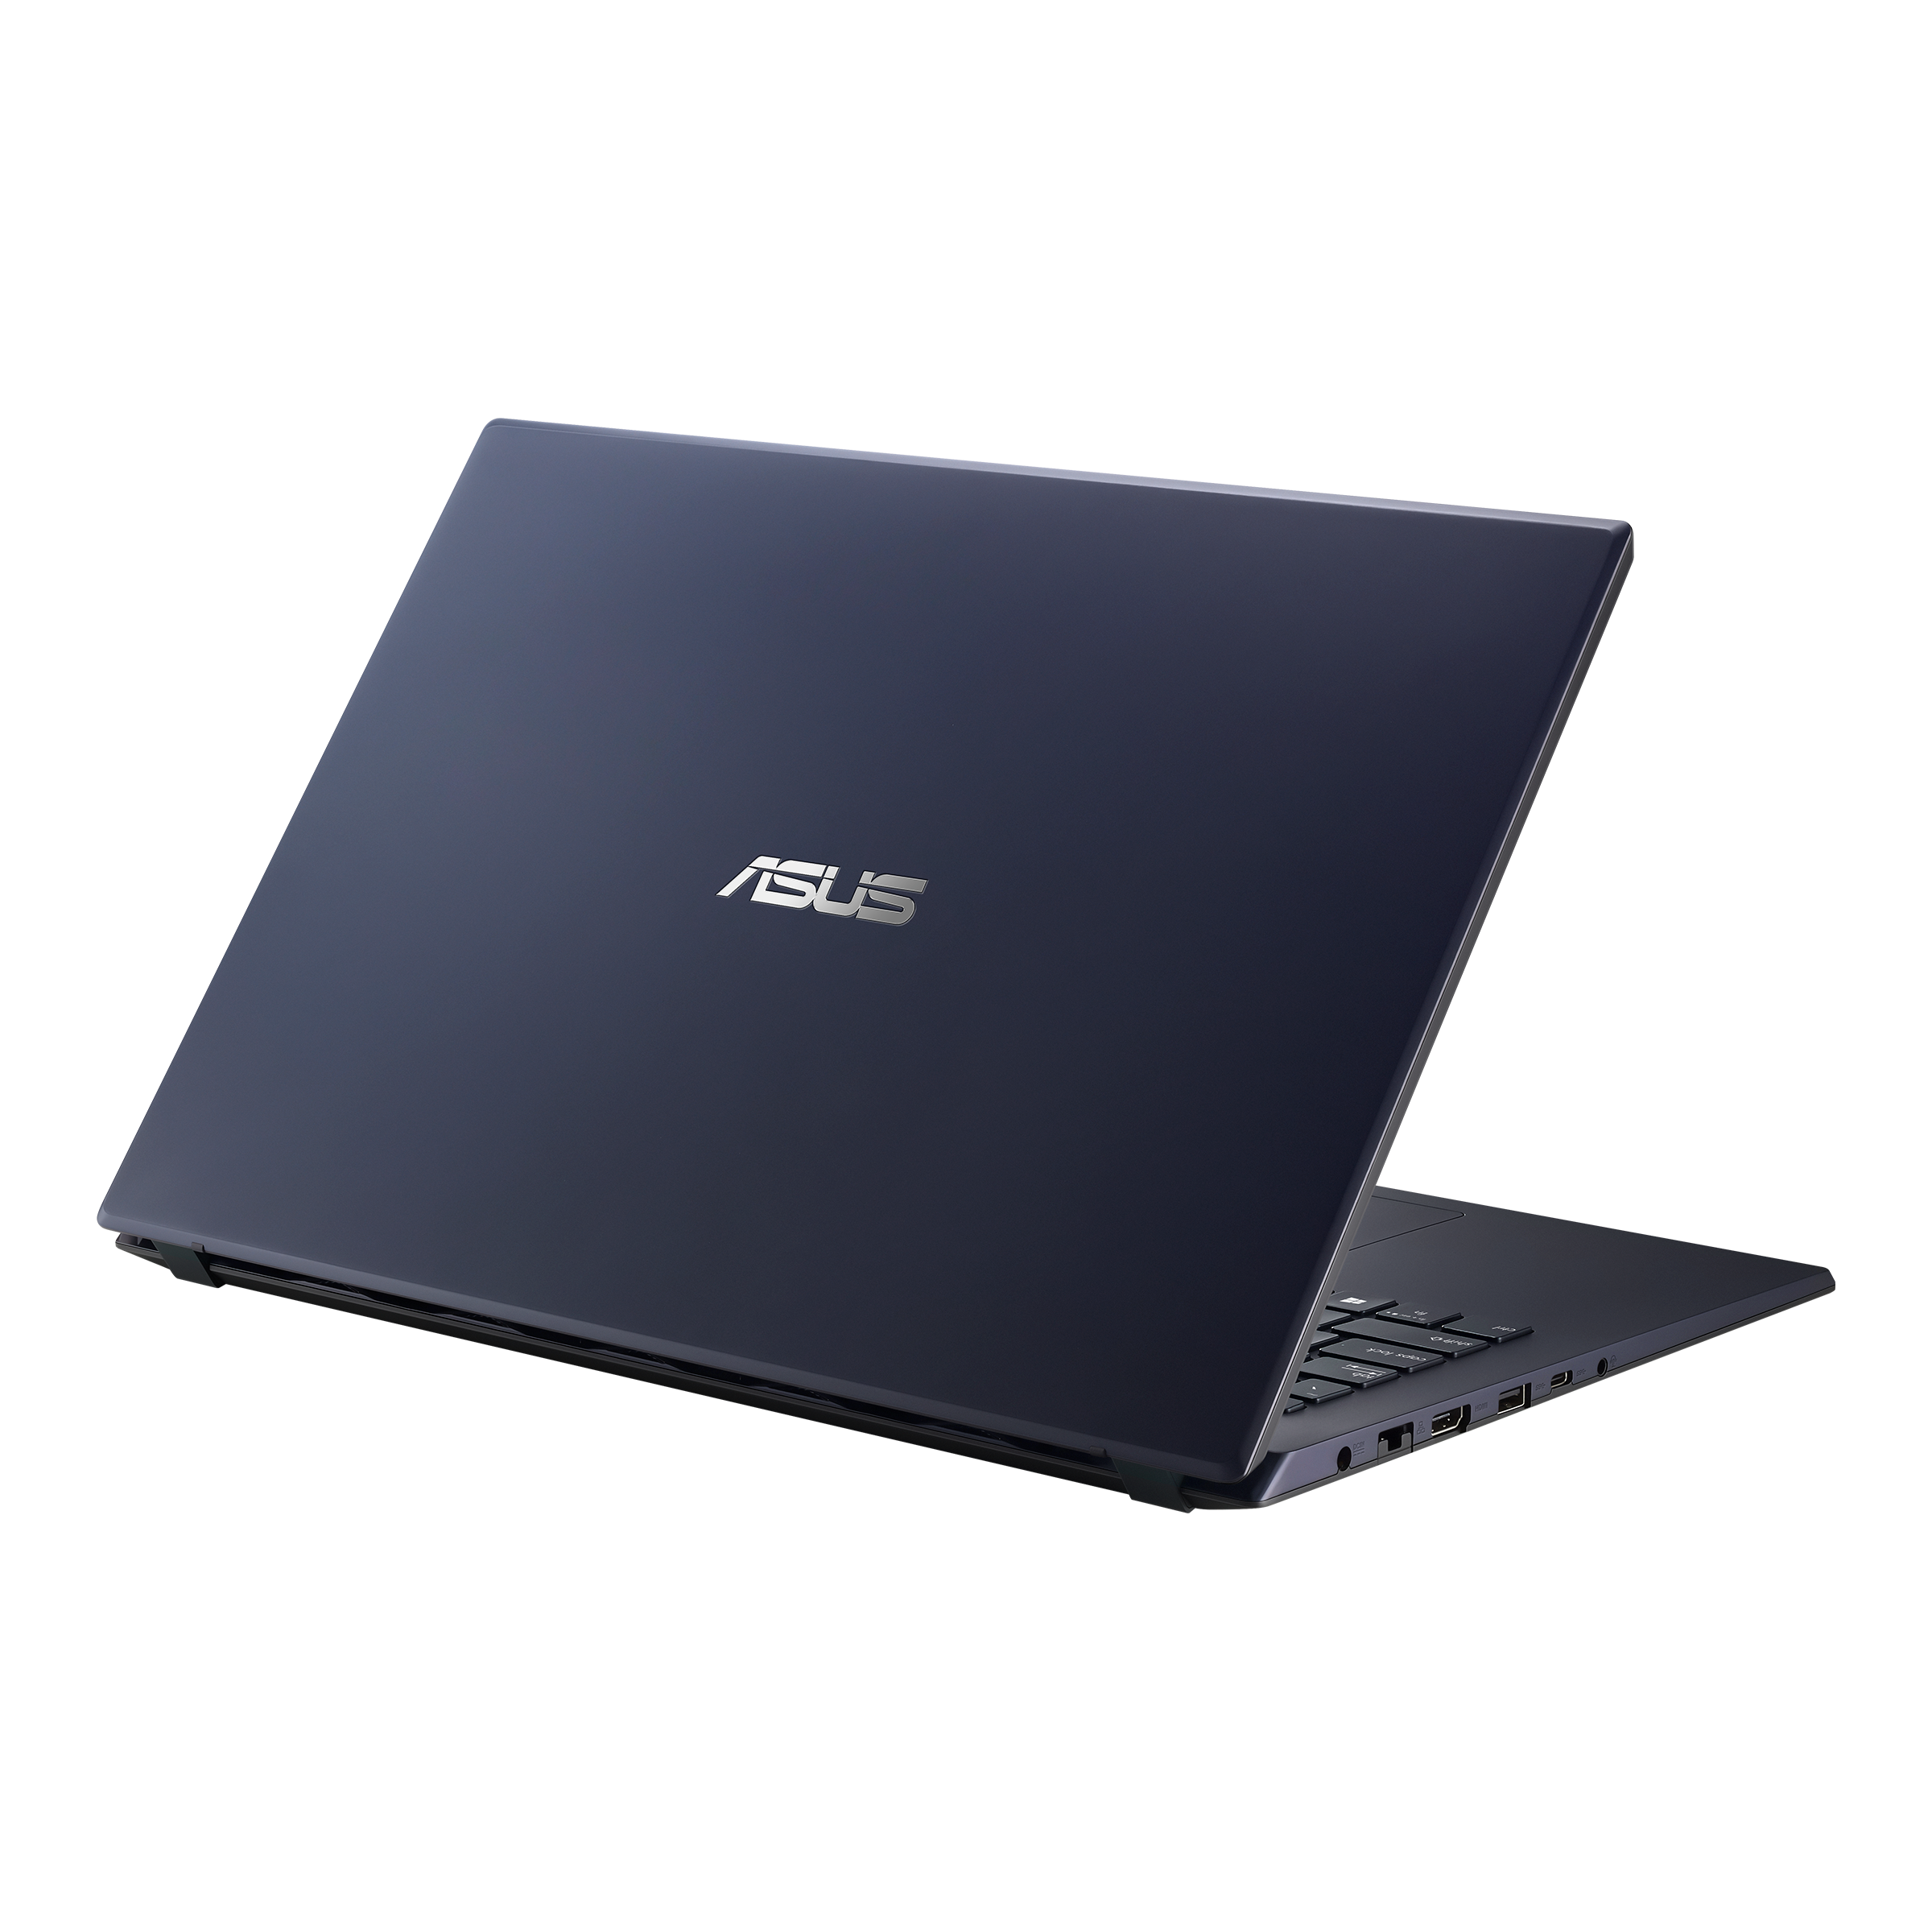 ASUS X541｜Laptops For Home｜ASUS Global